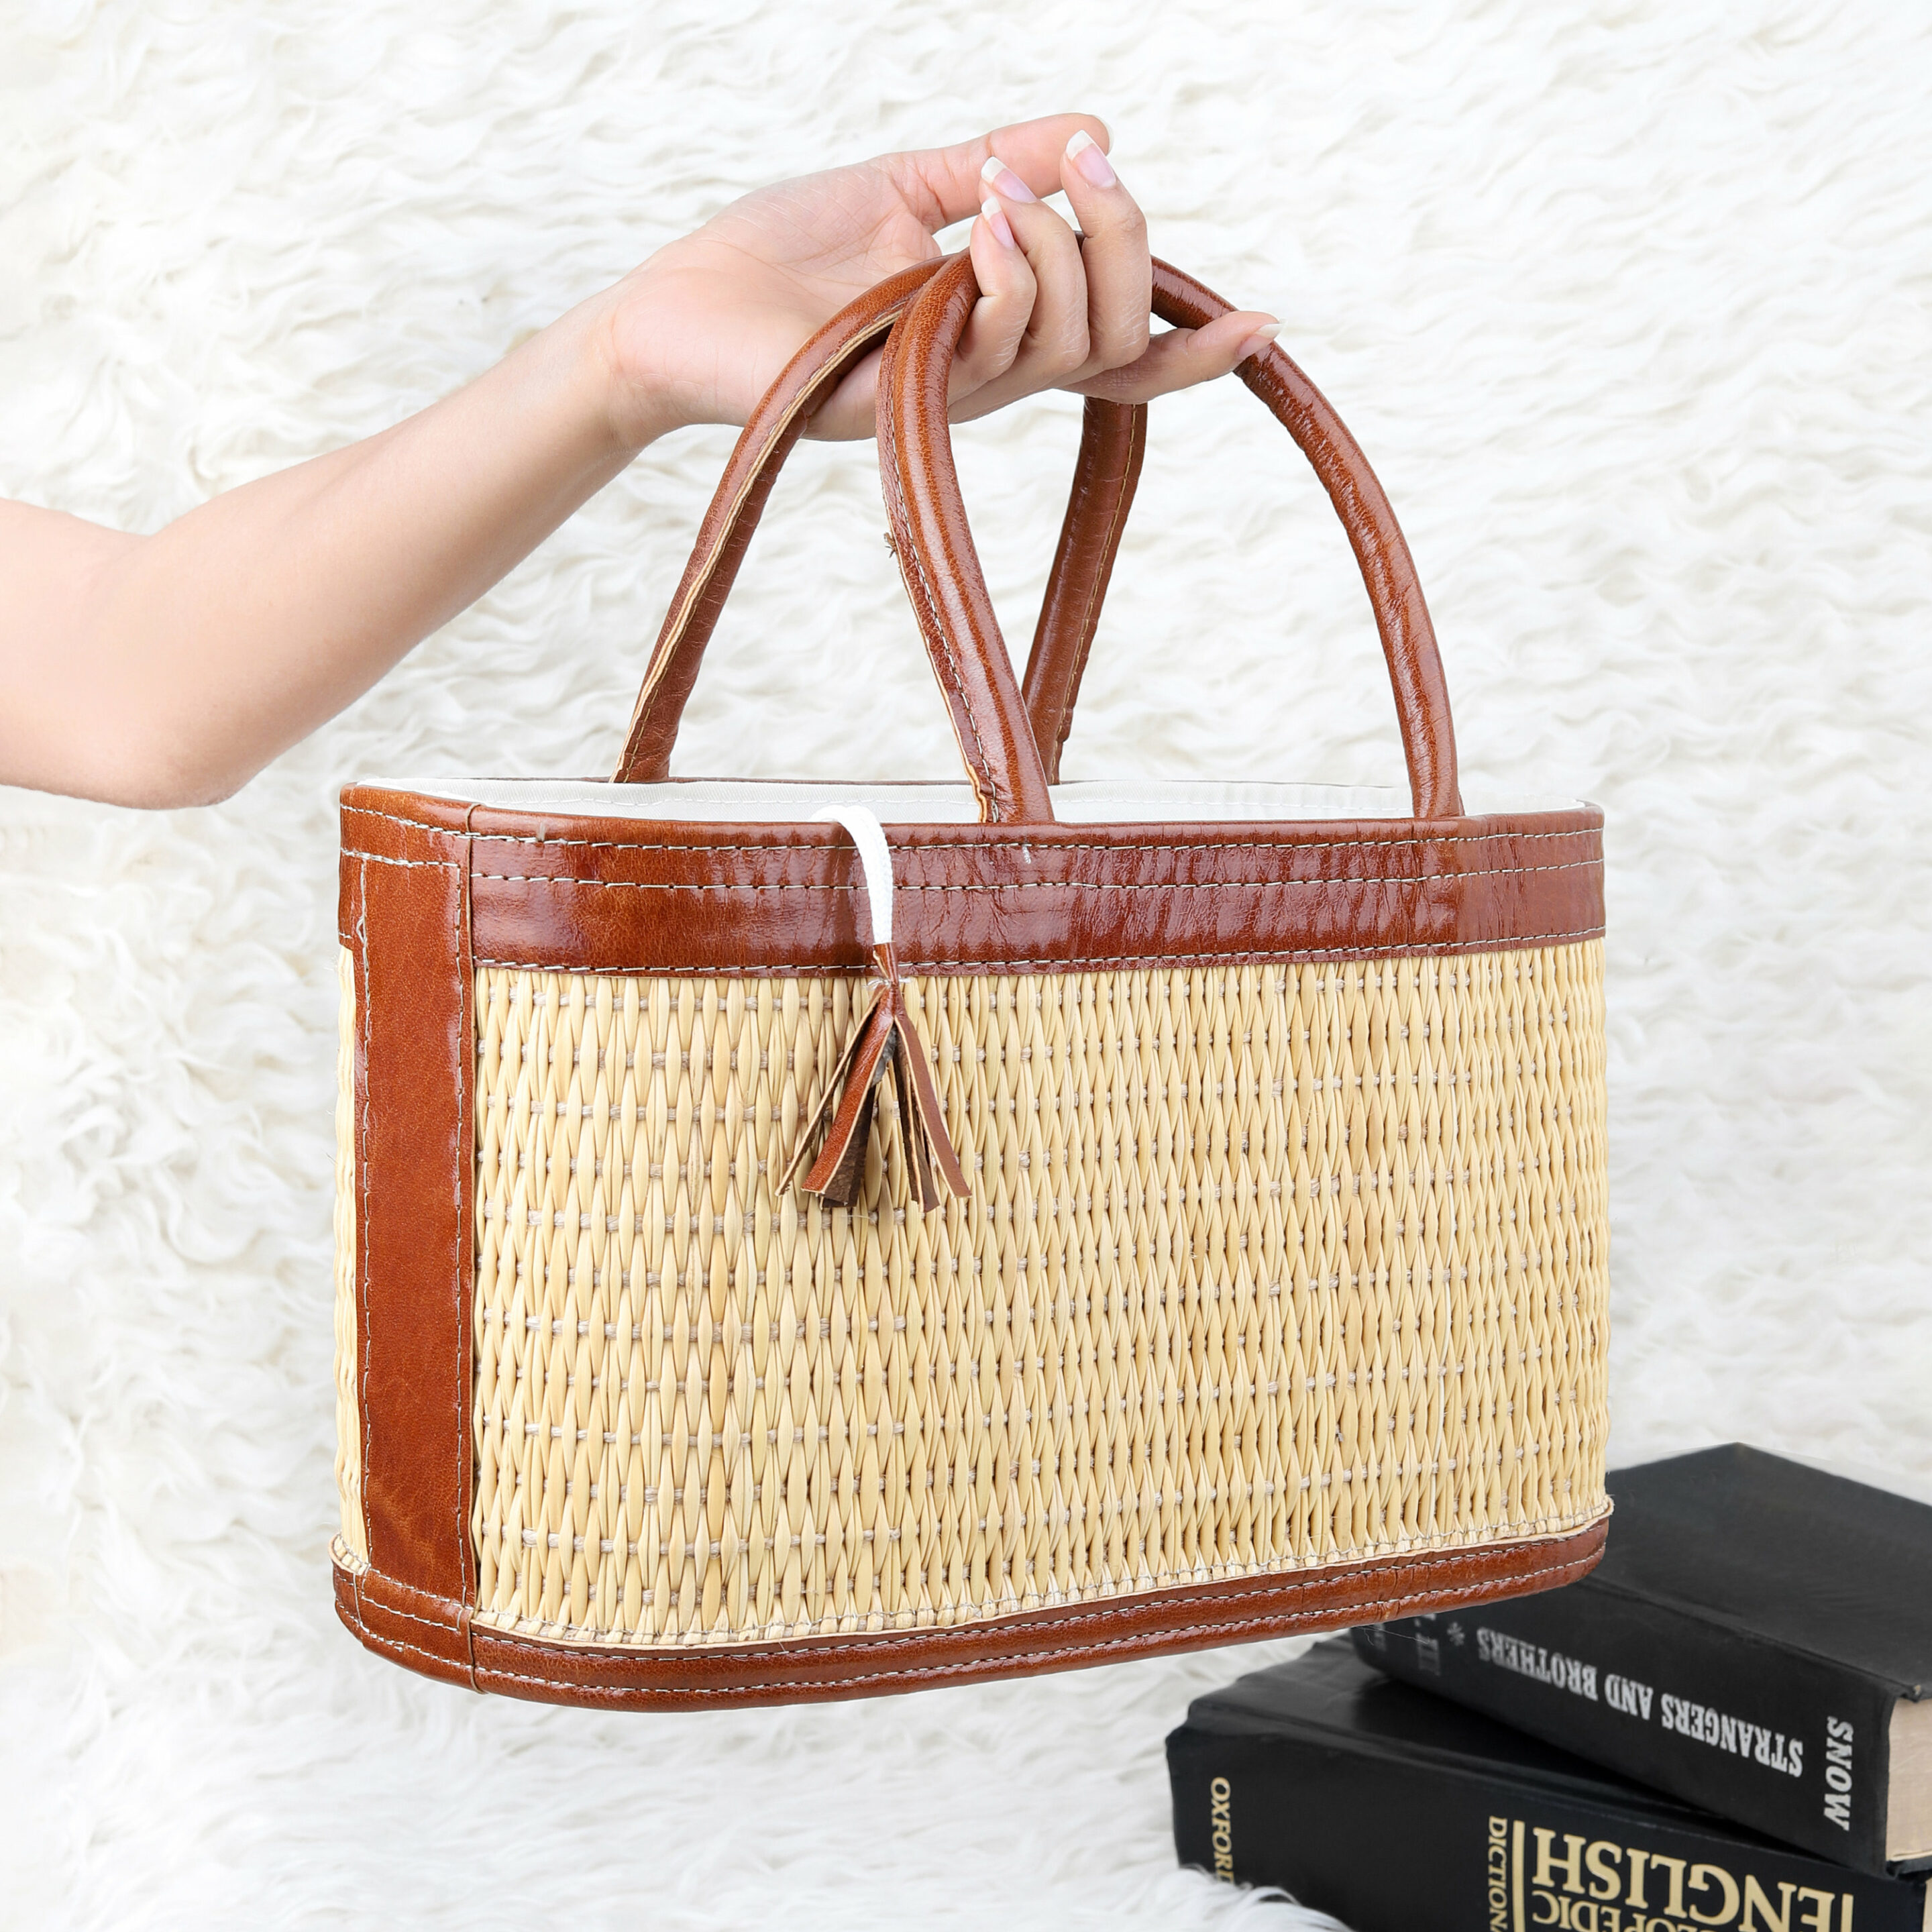 Woven Raffia Tote - Straw Bag - Leather Straw Bag - Large Tote Bag - Leather Top Handles